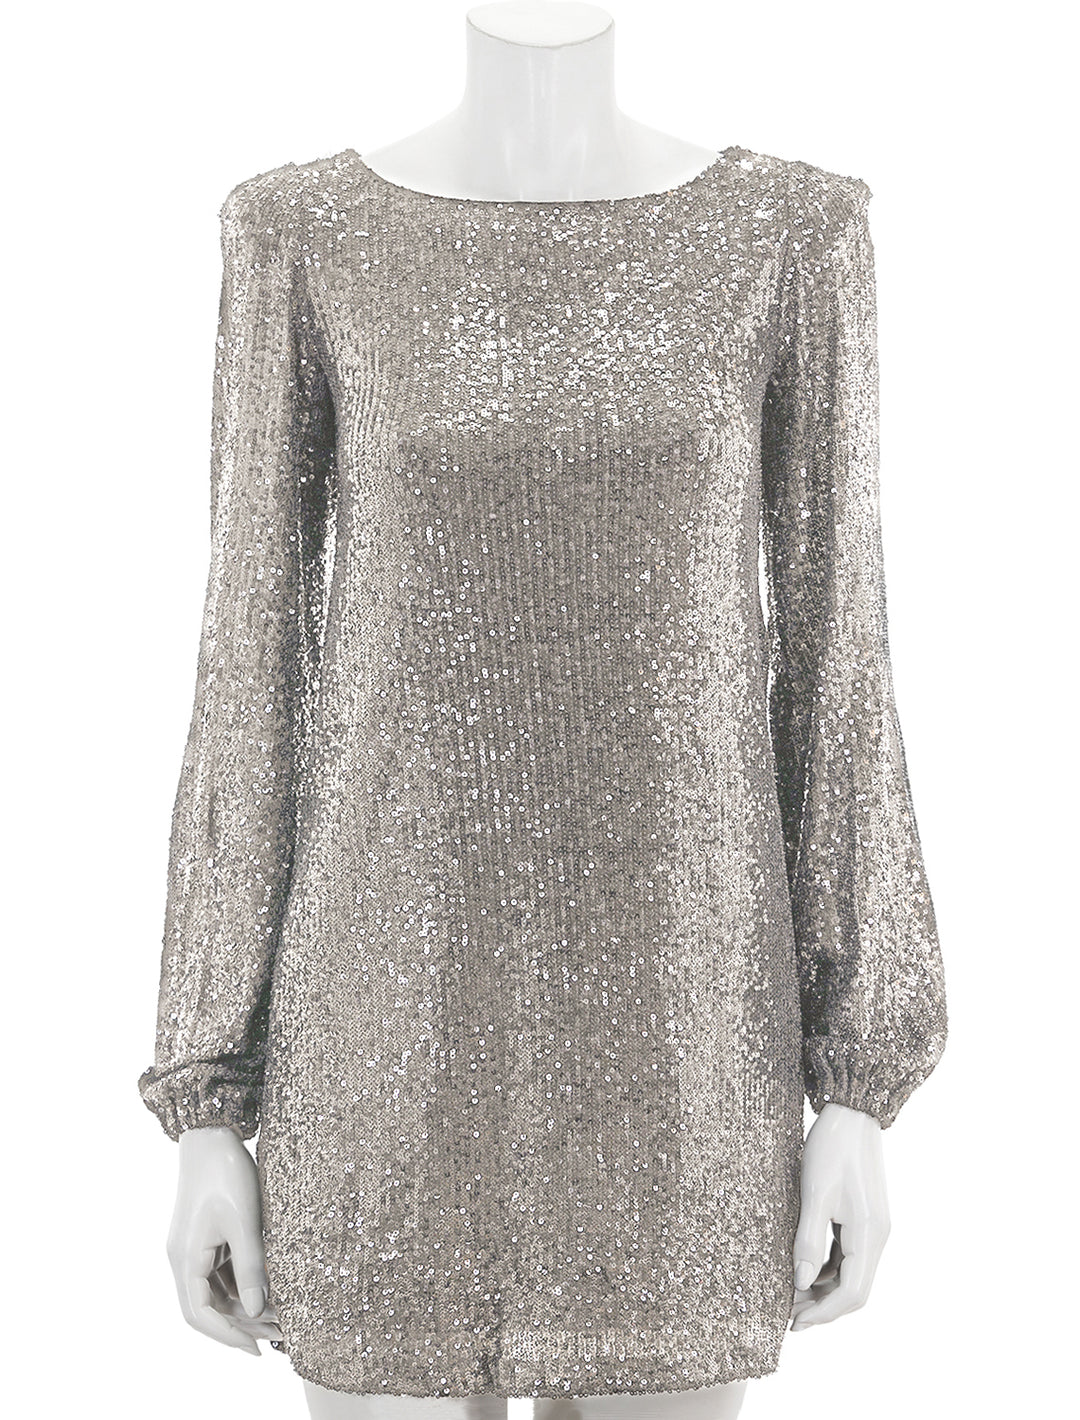 Front view of Steve Madden's delorean dress in silver.